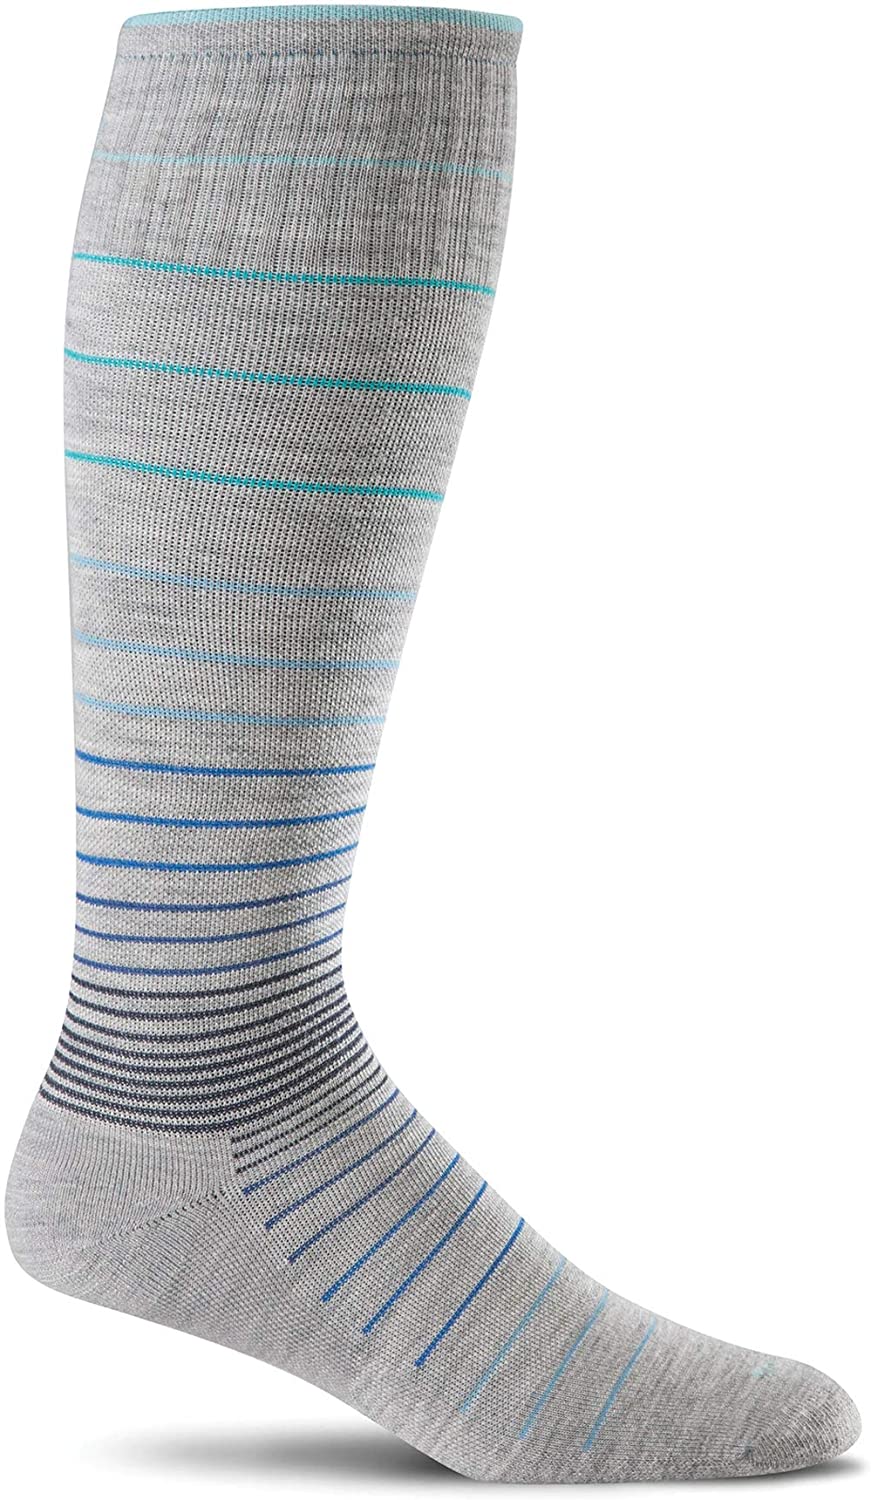 Sockwell Women's Circulator Moderate Graduated Compression Sock in Grey from the side